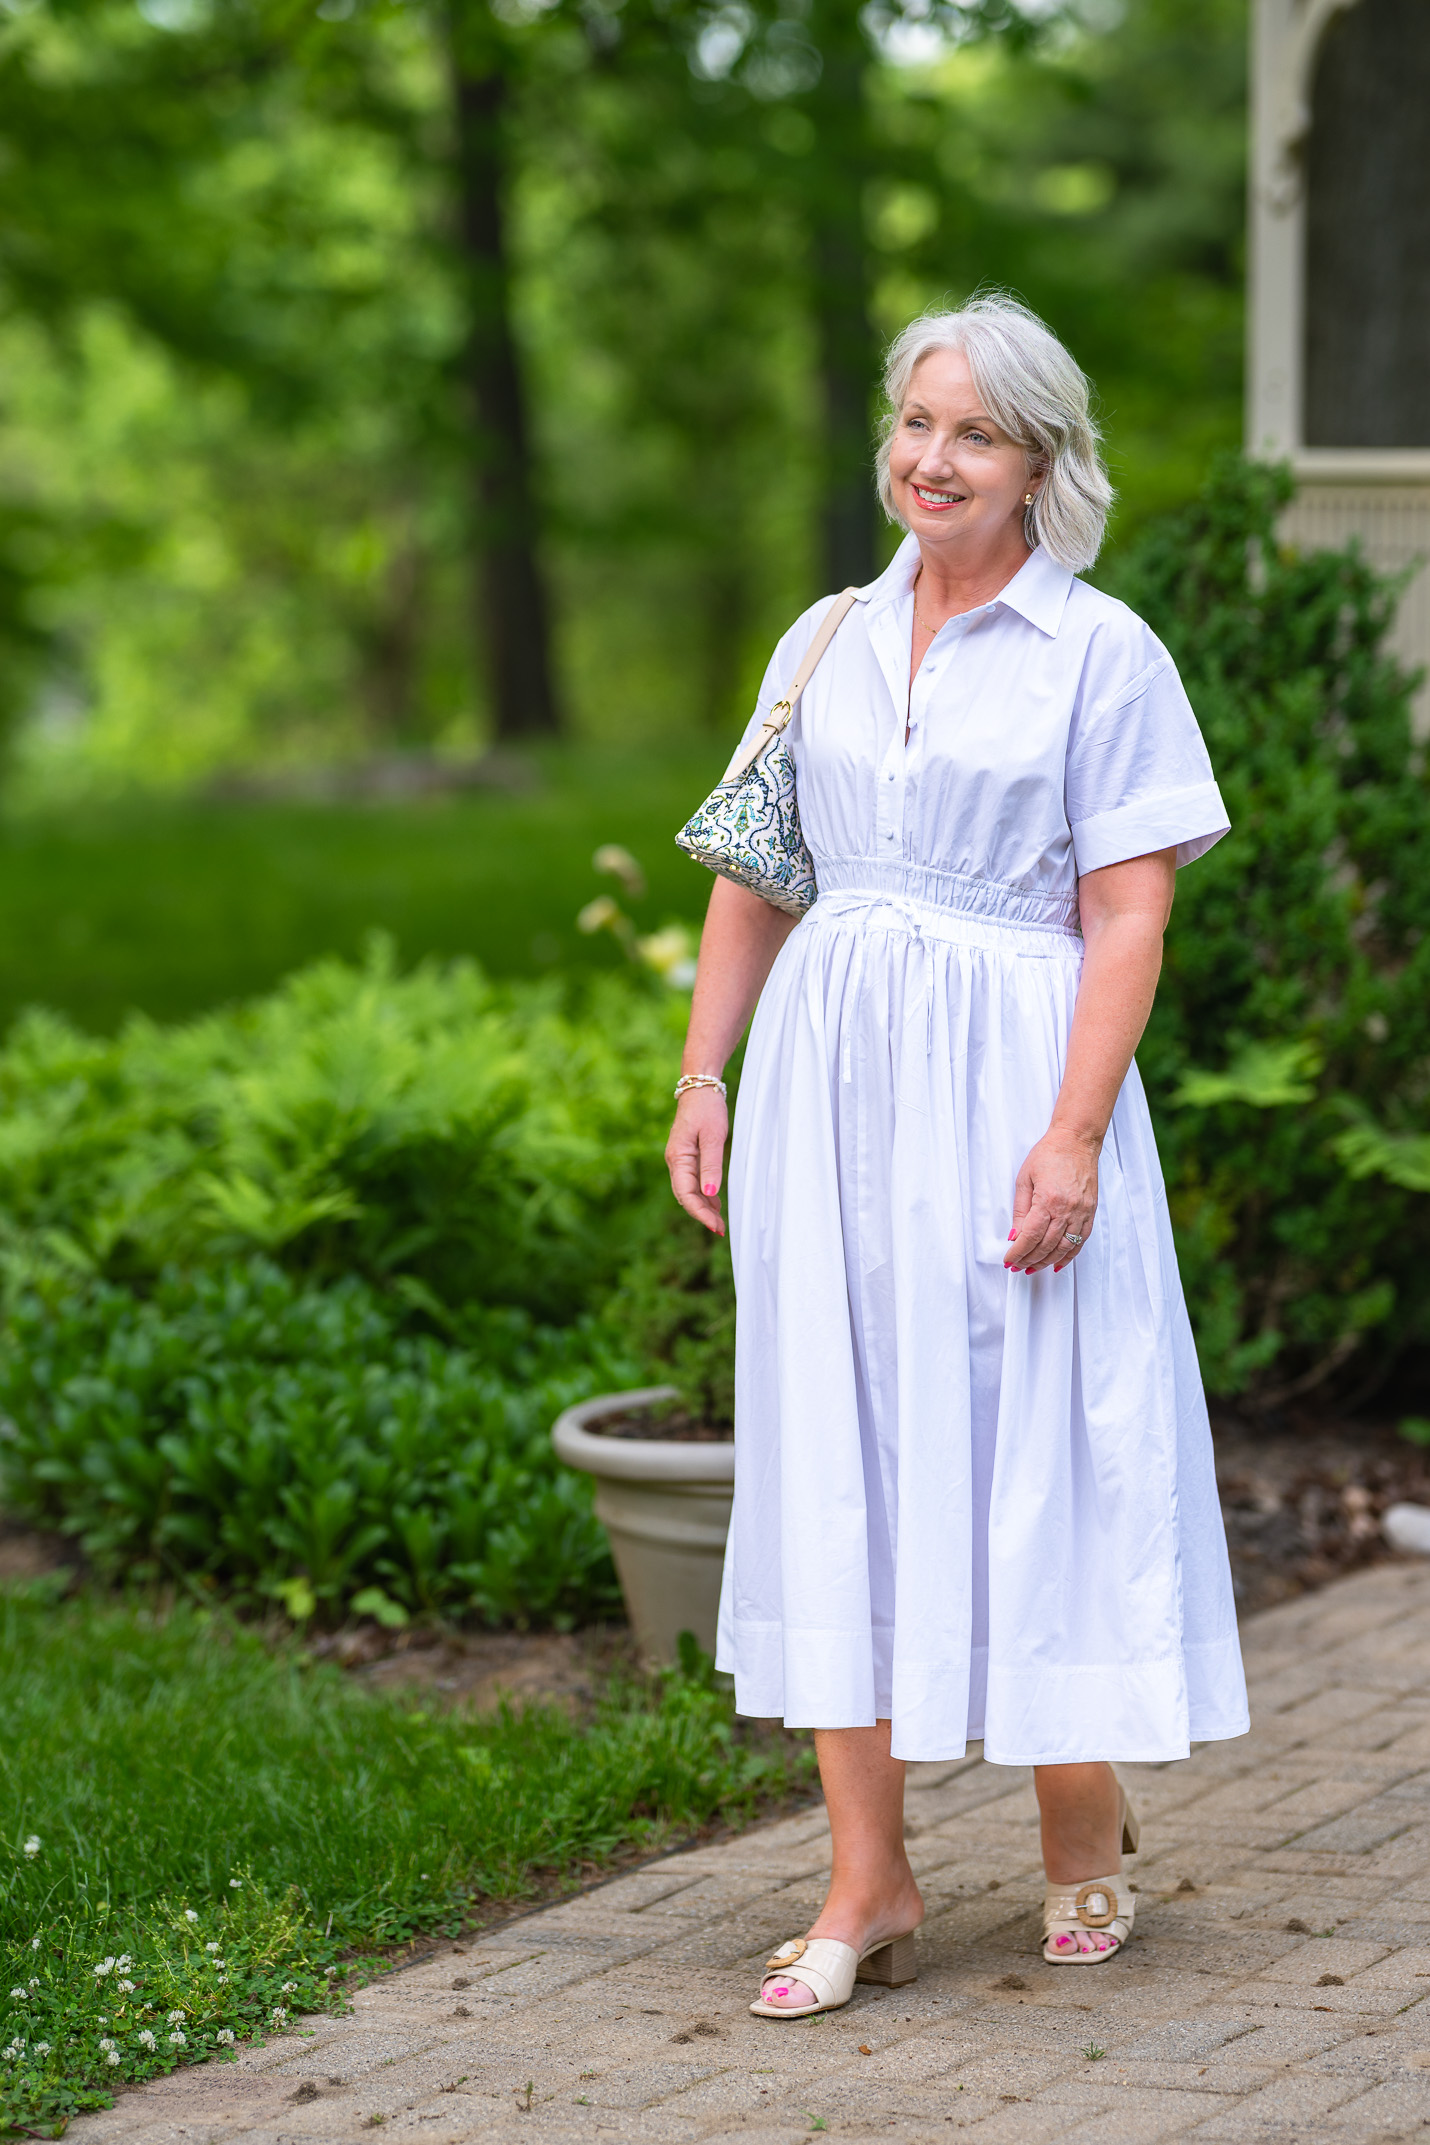 Can You Wear a Trending White Dress Over 50?